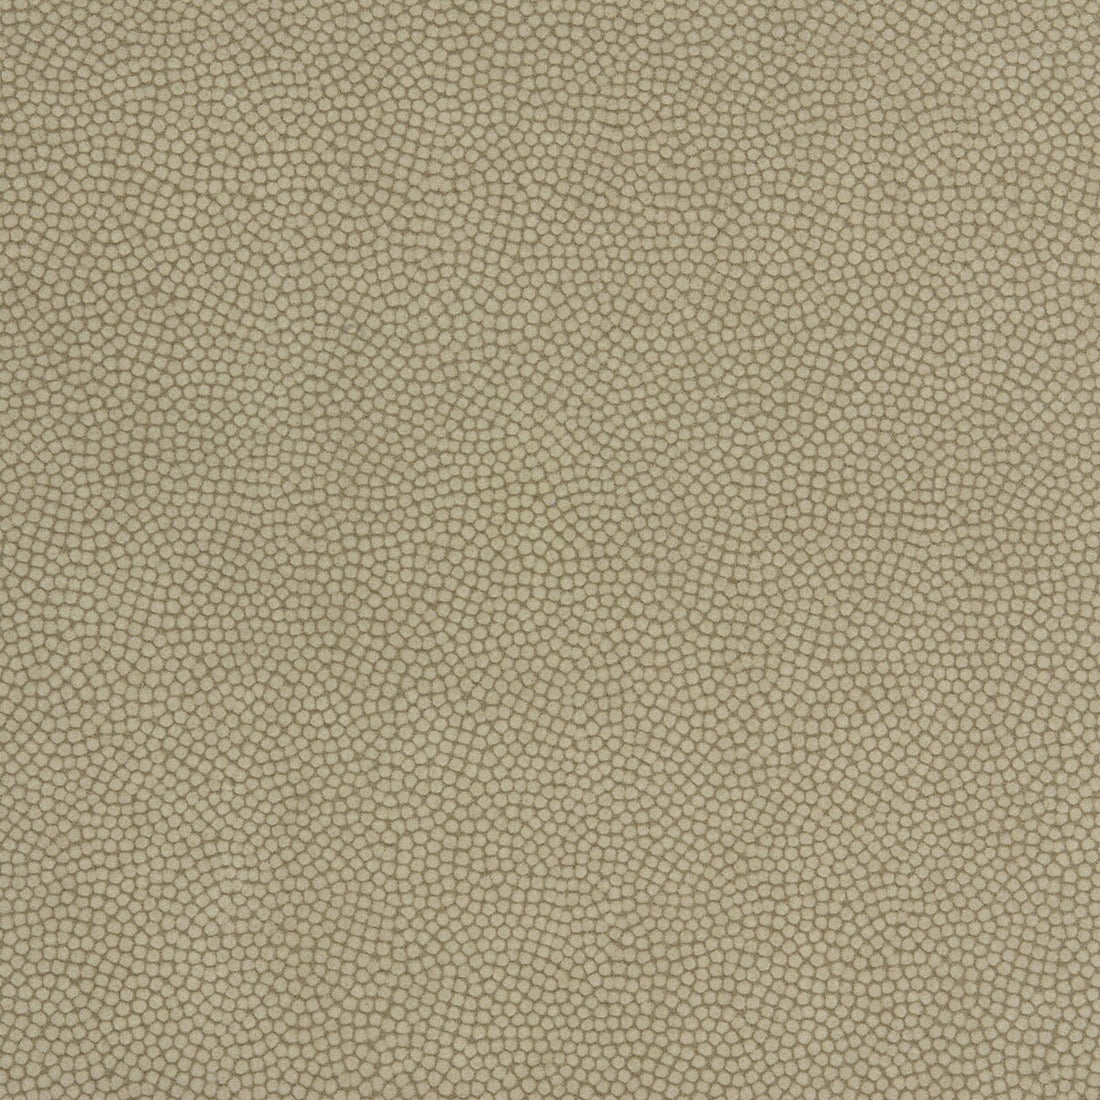 Beautymark fabric in greystone color - pattern BEAUTYMARK.106.0 - by Kravet Couture